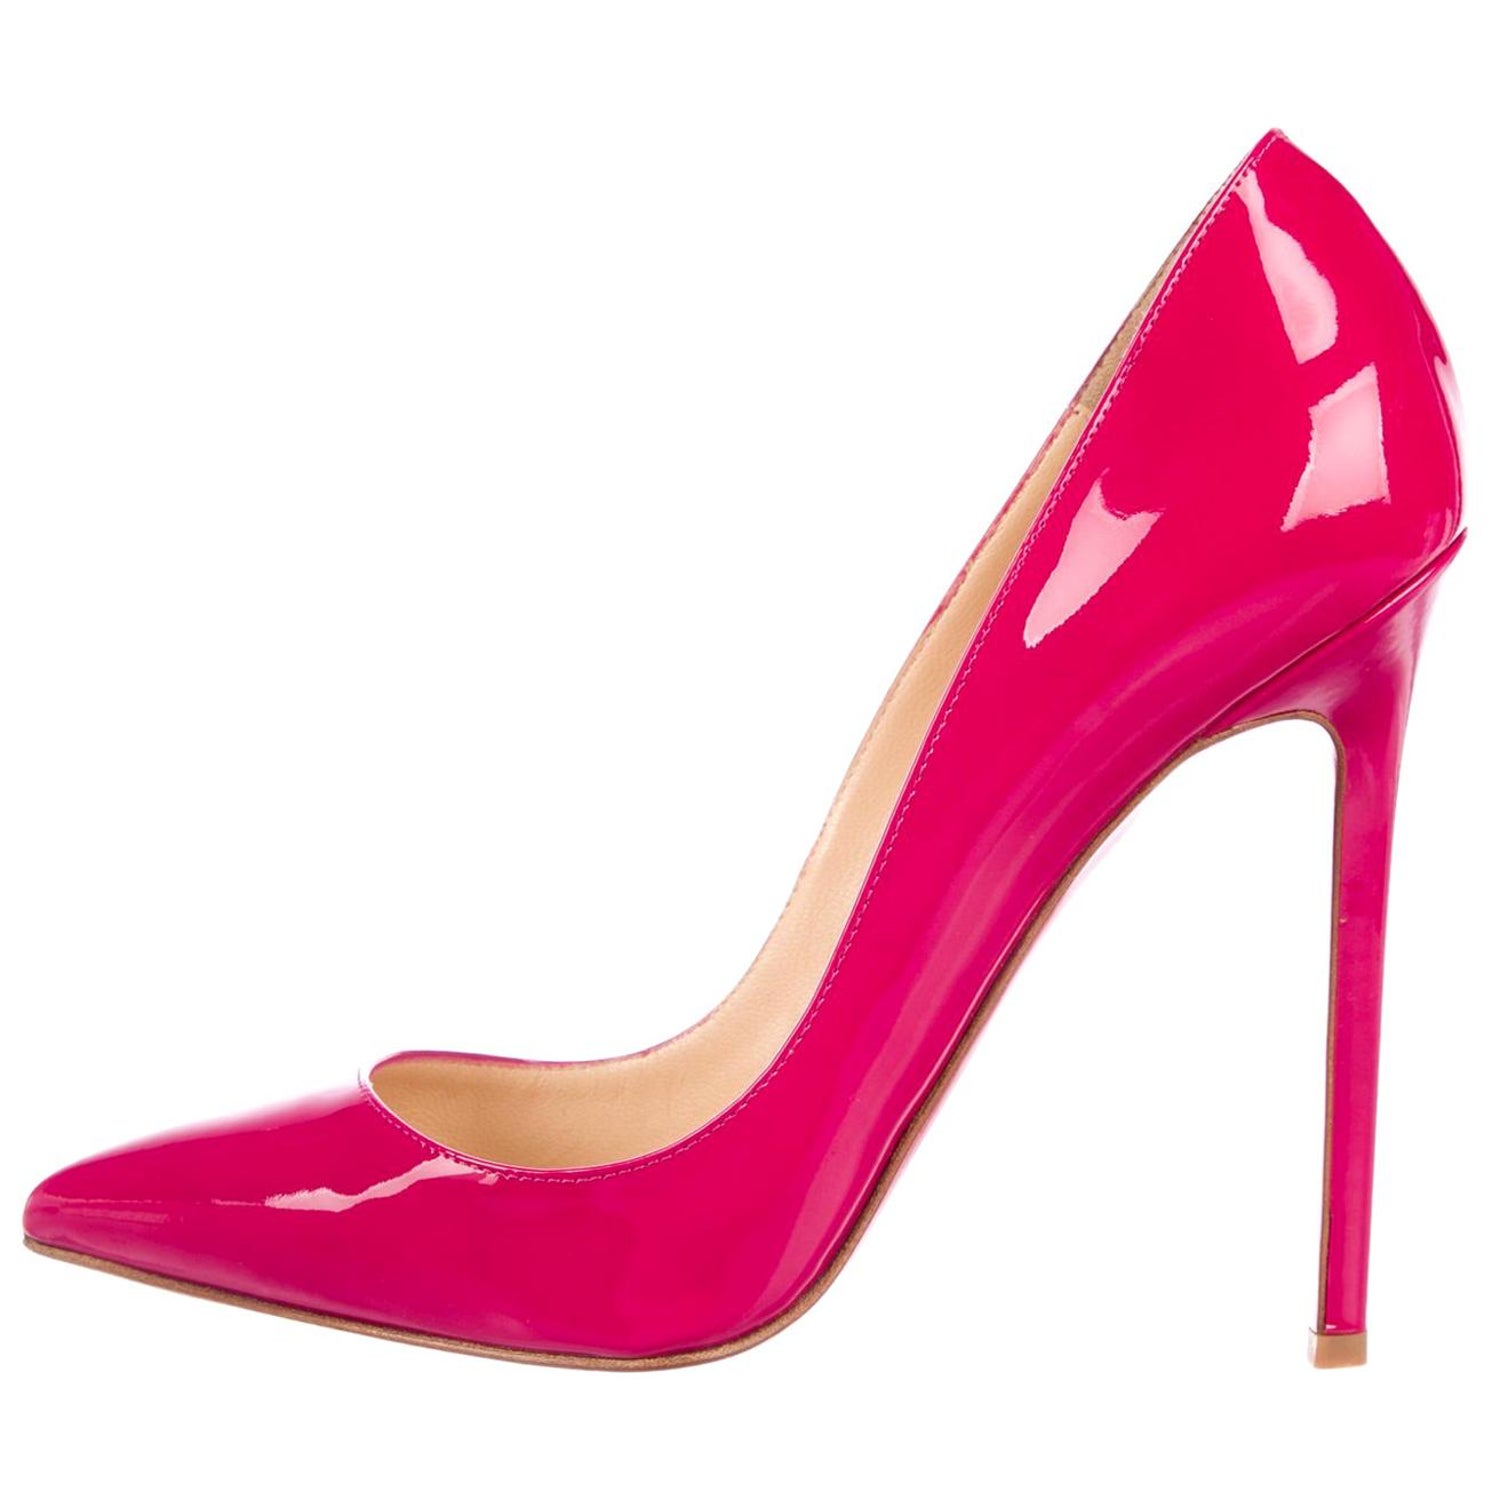 Louboutin Pigalle 120 - 6 For Sale on 1stDibs | christian louboutin pigalle  120, christian louboutin pigalle, pigalle 120mm